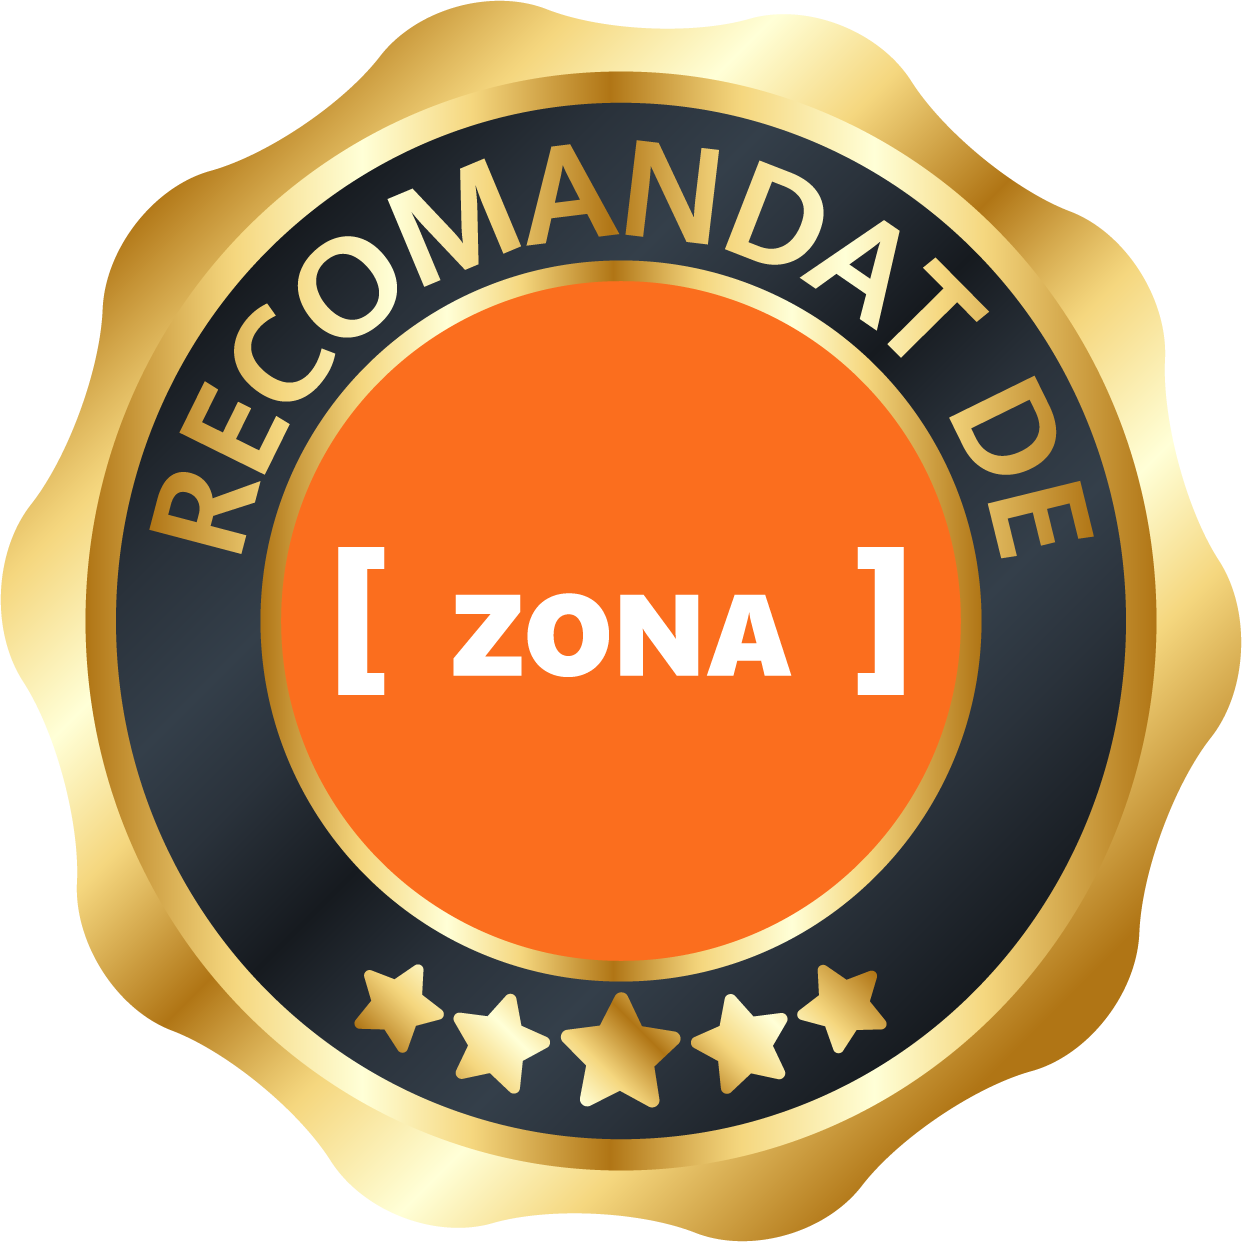 Recommended by Zona IT